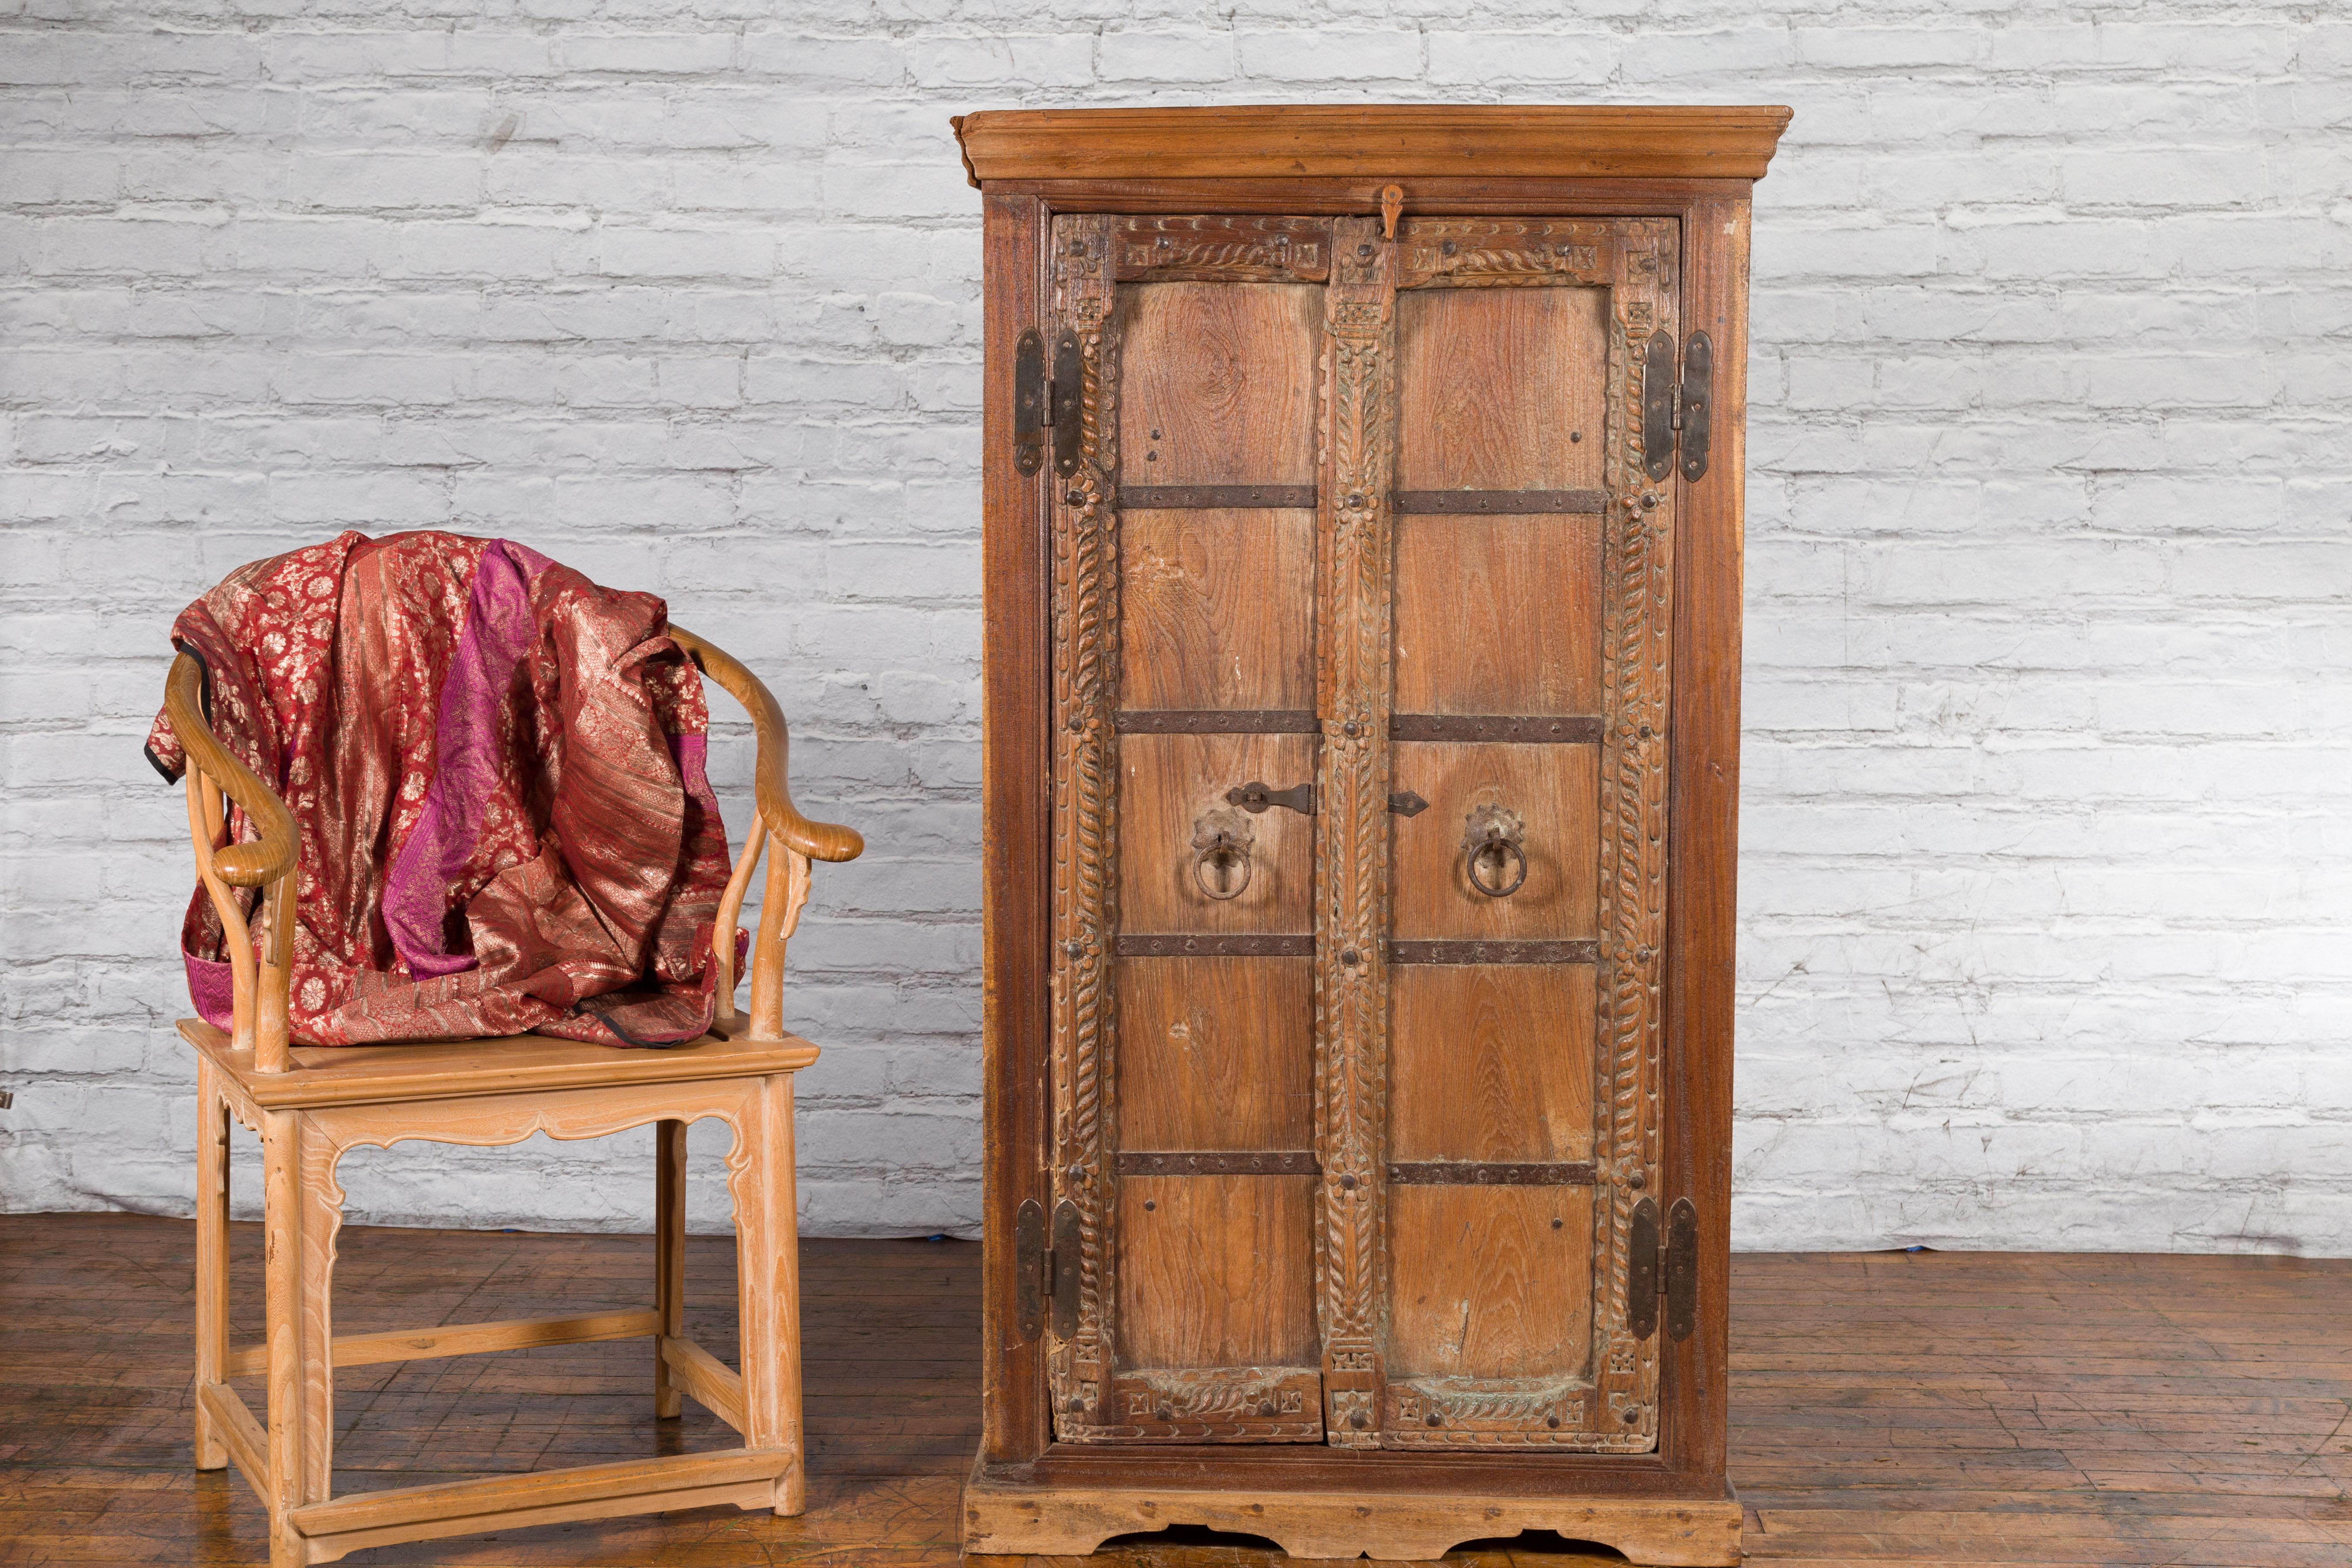 Rustic Antique 19th Century Indian Armoire with Metal Braces and Hand-Carved Décor